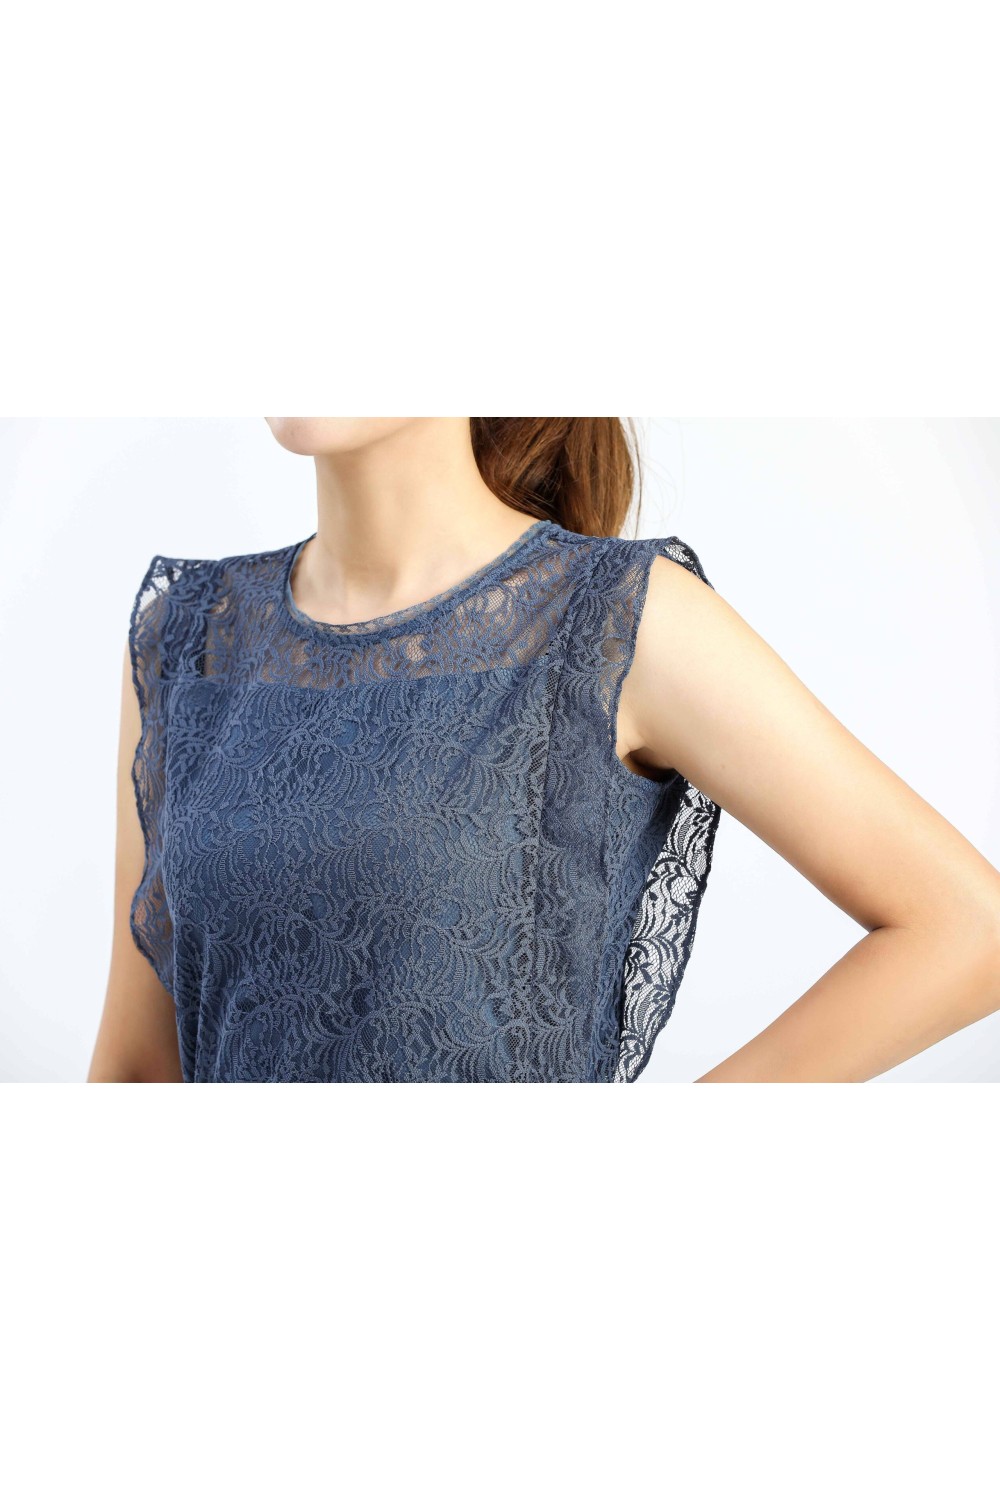 Sleeveless Lace Top